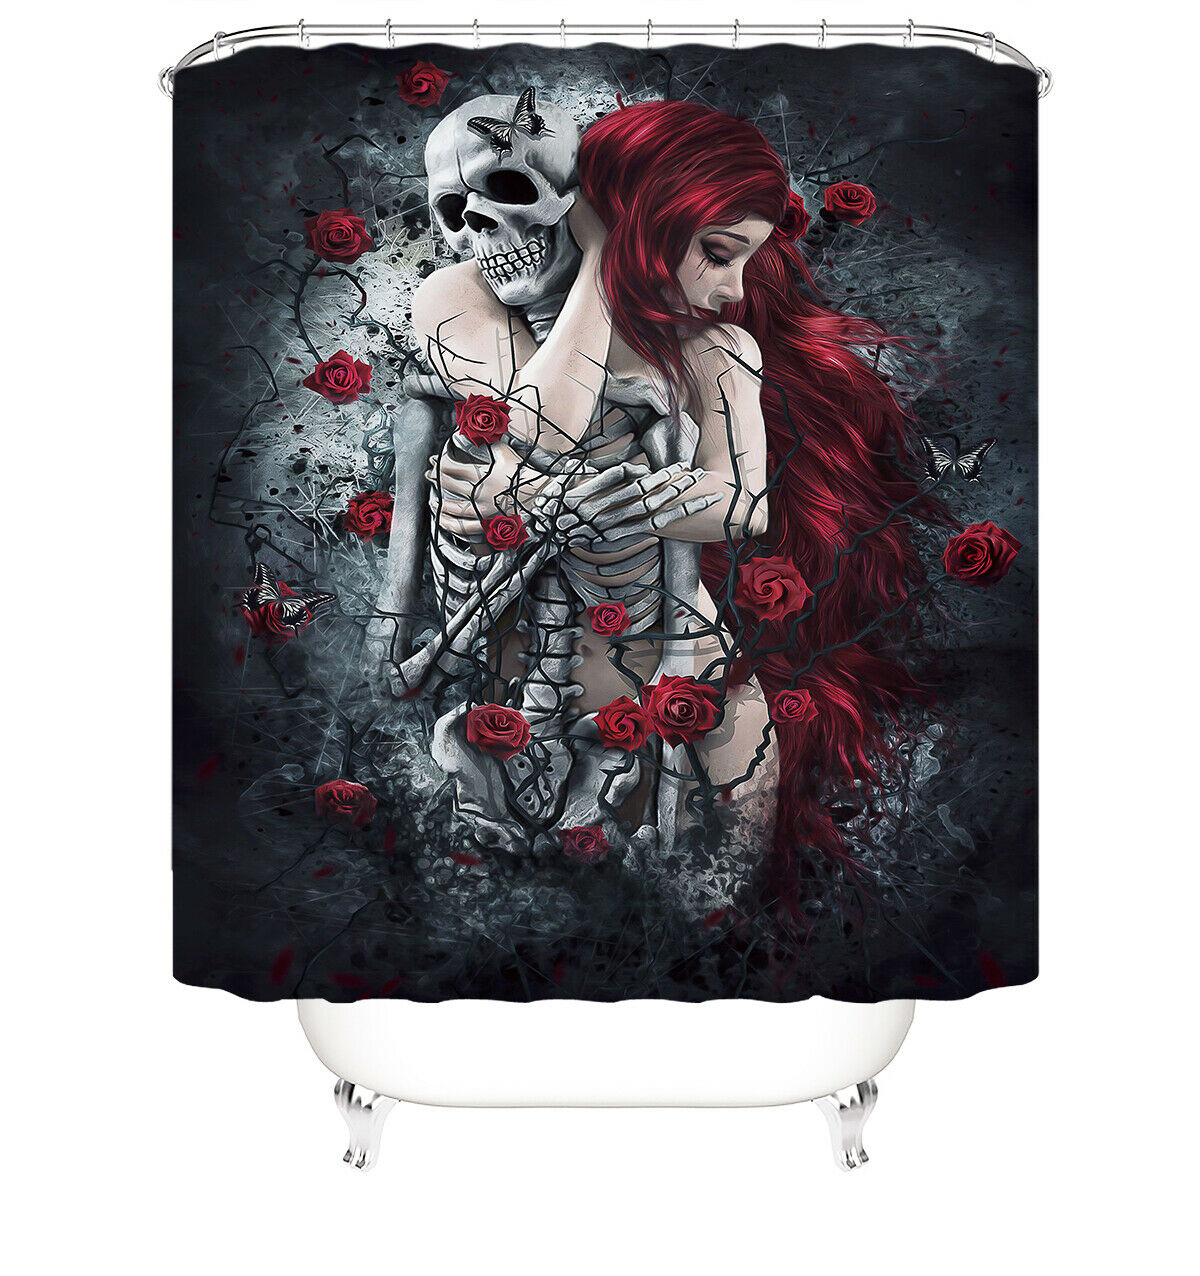 Farewell Hug Shower Curtain Bathroom Rug Set Bath Mat Non-Slip Toilet Lid Cover-180×180cm Shower Curtain Only-Free Shipping at meselling99